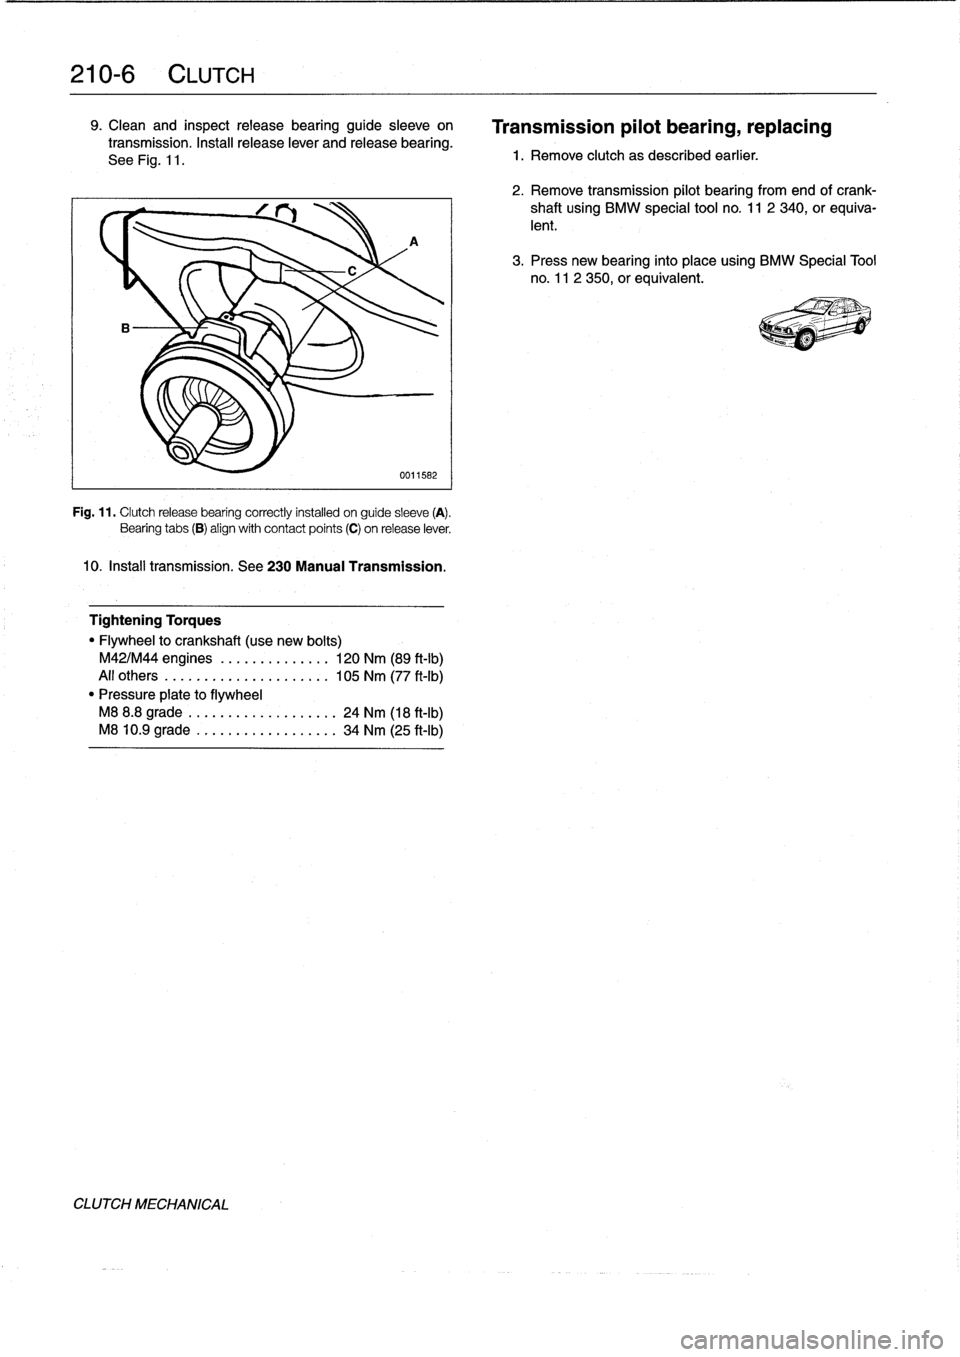 BMW 318i 1995 E36 User Guide 
210-
6
CLUTCH

9
.
Clean
and
inspectrelease
bearing
guide
sleeve
on

transmission
.
Install
release
lever
and
release
bearing
.

See
Fig
.
11
.

A

0011582

Fig
.
11
.
Clutchrelease
bearing
correctly